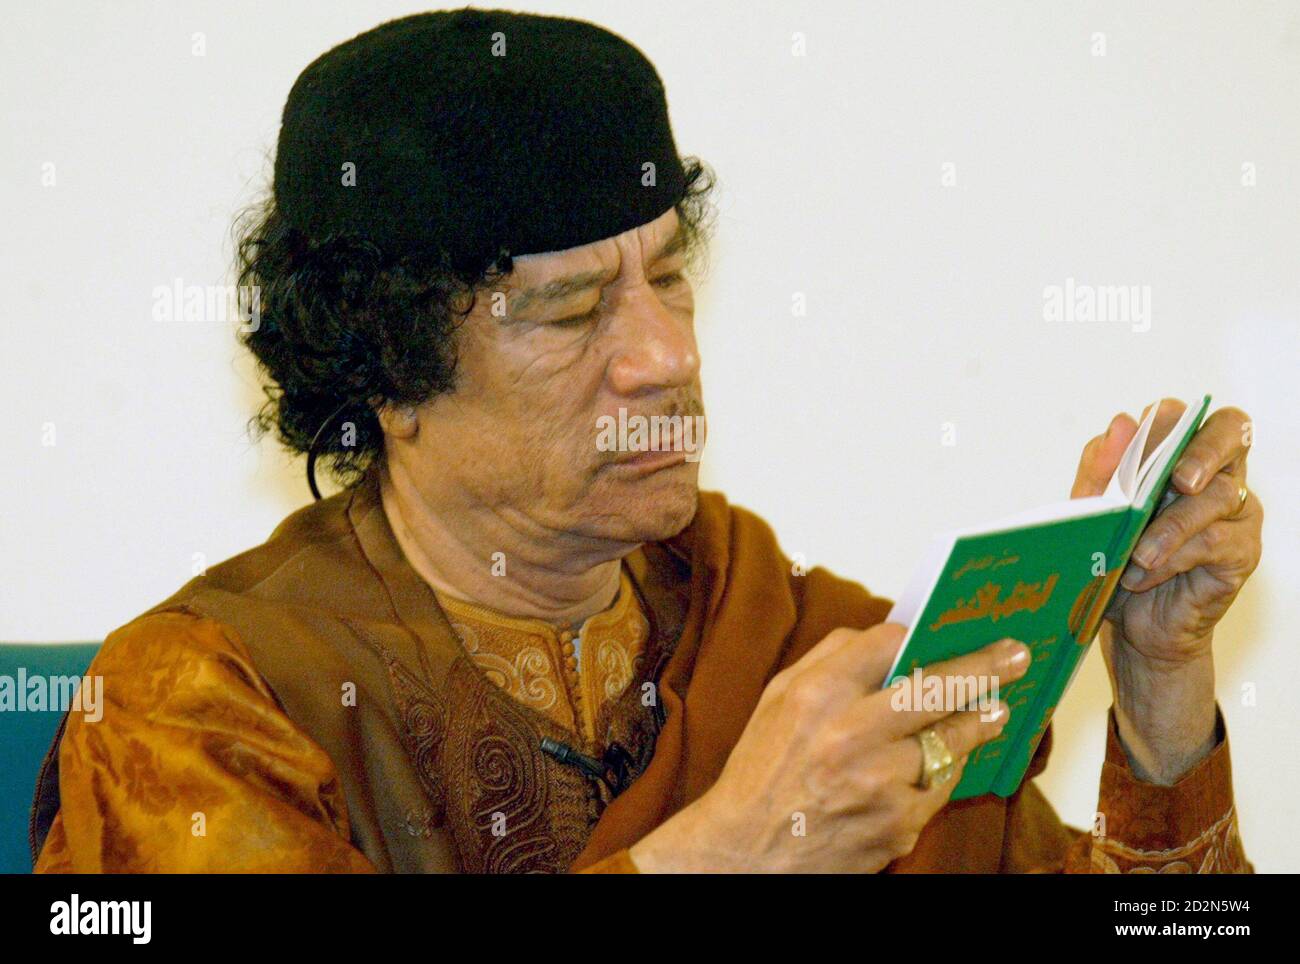 Libyan leader Muammar Gaddafi reads a green book during his debate on democracy with two Western scholars in the desert in Sebha March 2, 2007, in a move apparently designed to further the resumption of international ties following years of isolation. Speaking on the 30th anniversary of his declaration of a Jamahiriyah or state of the masses, Gaddafi said Libya was embracing globalisation and the outside world after years of sanctions but insisted his experiment in rule by town hall meetings was fairer than the West's ballot box democracy. REUTERS/Louafi Larbi (LIBYA) Stock Photo